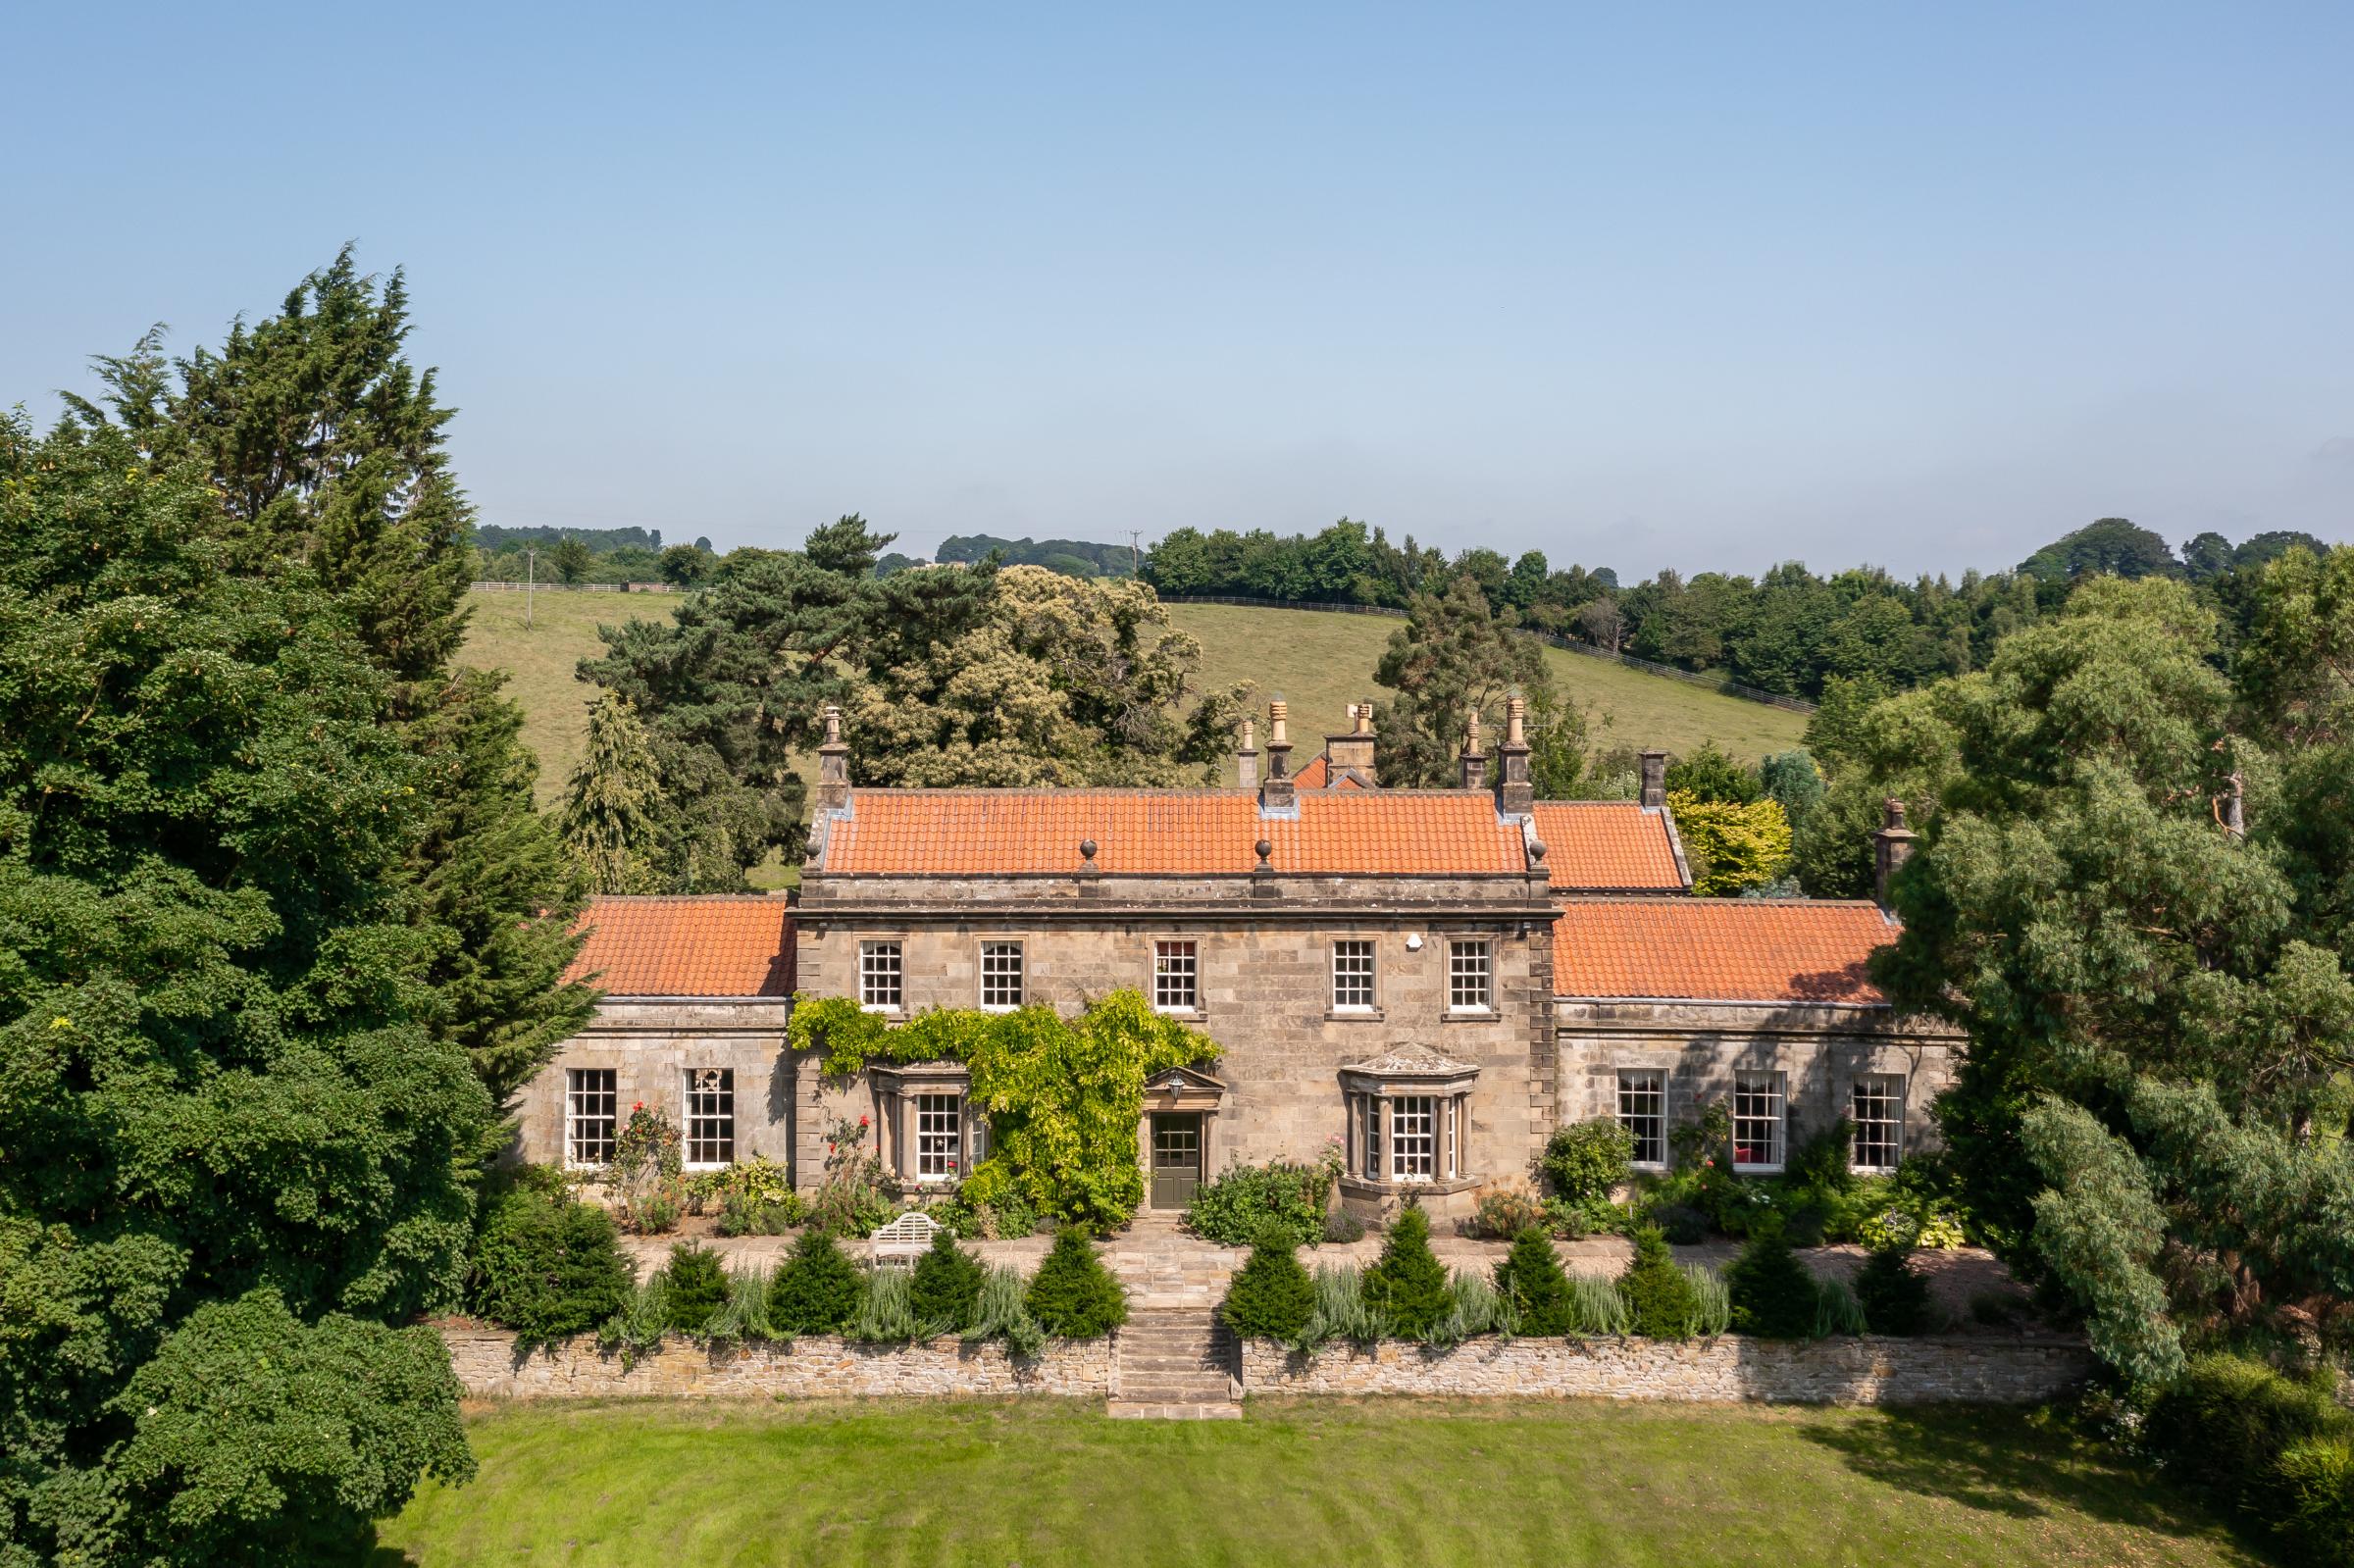 St Trinians, on the edge of Richmond, is on the market with a guide price of £2.5m